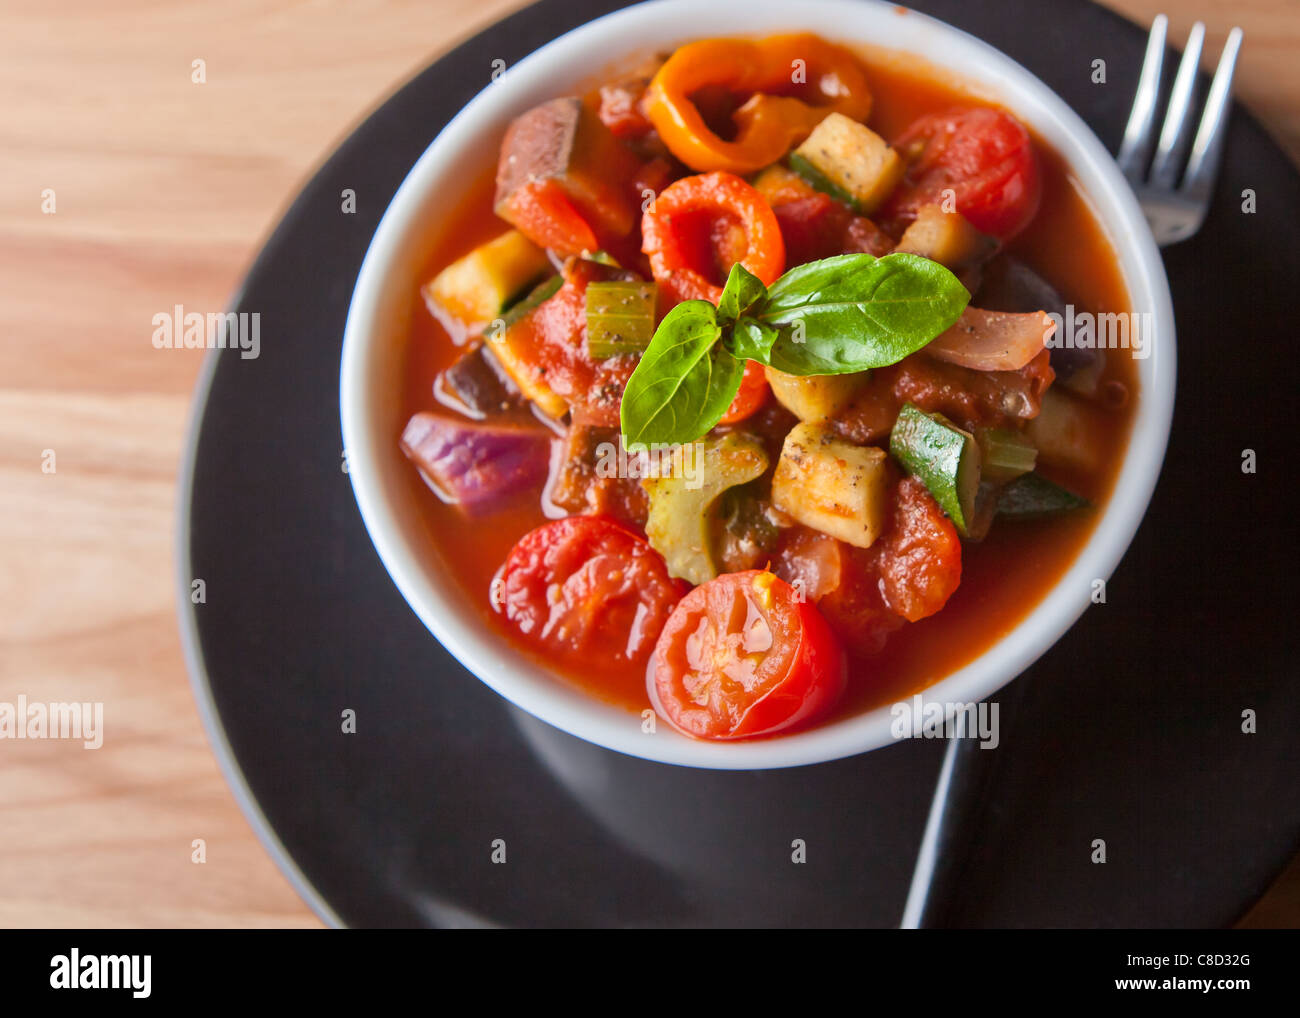 home made spicy vegetable stew Stock Photo